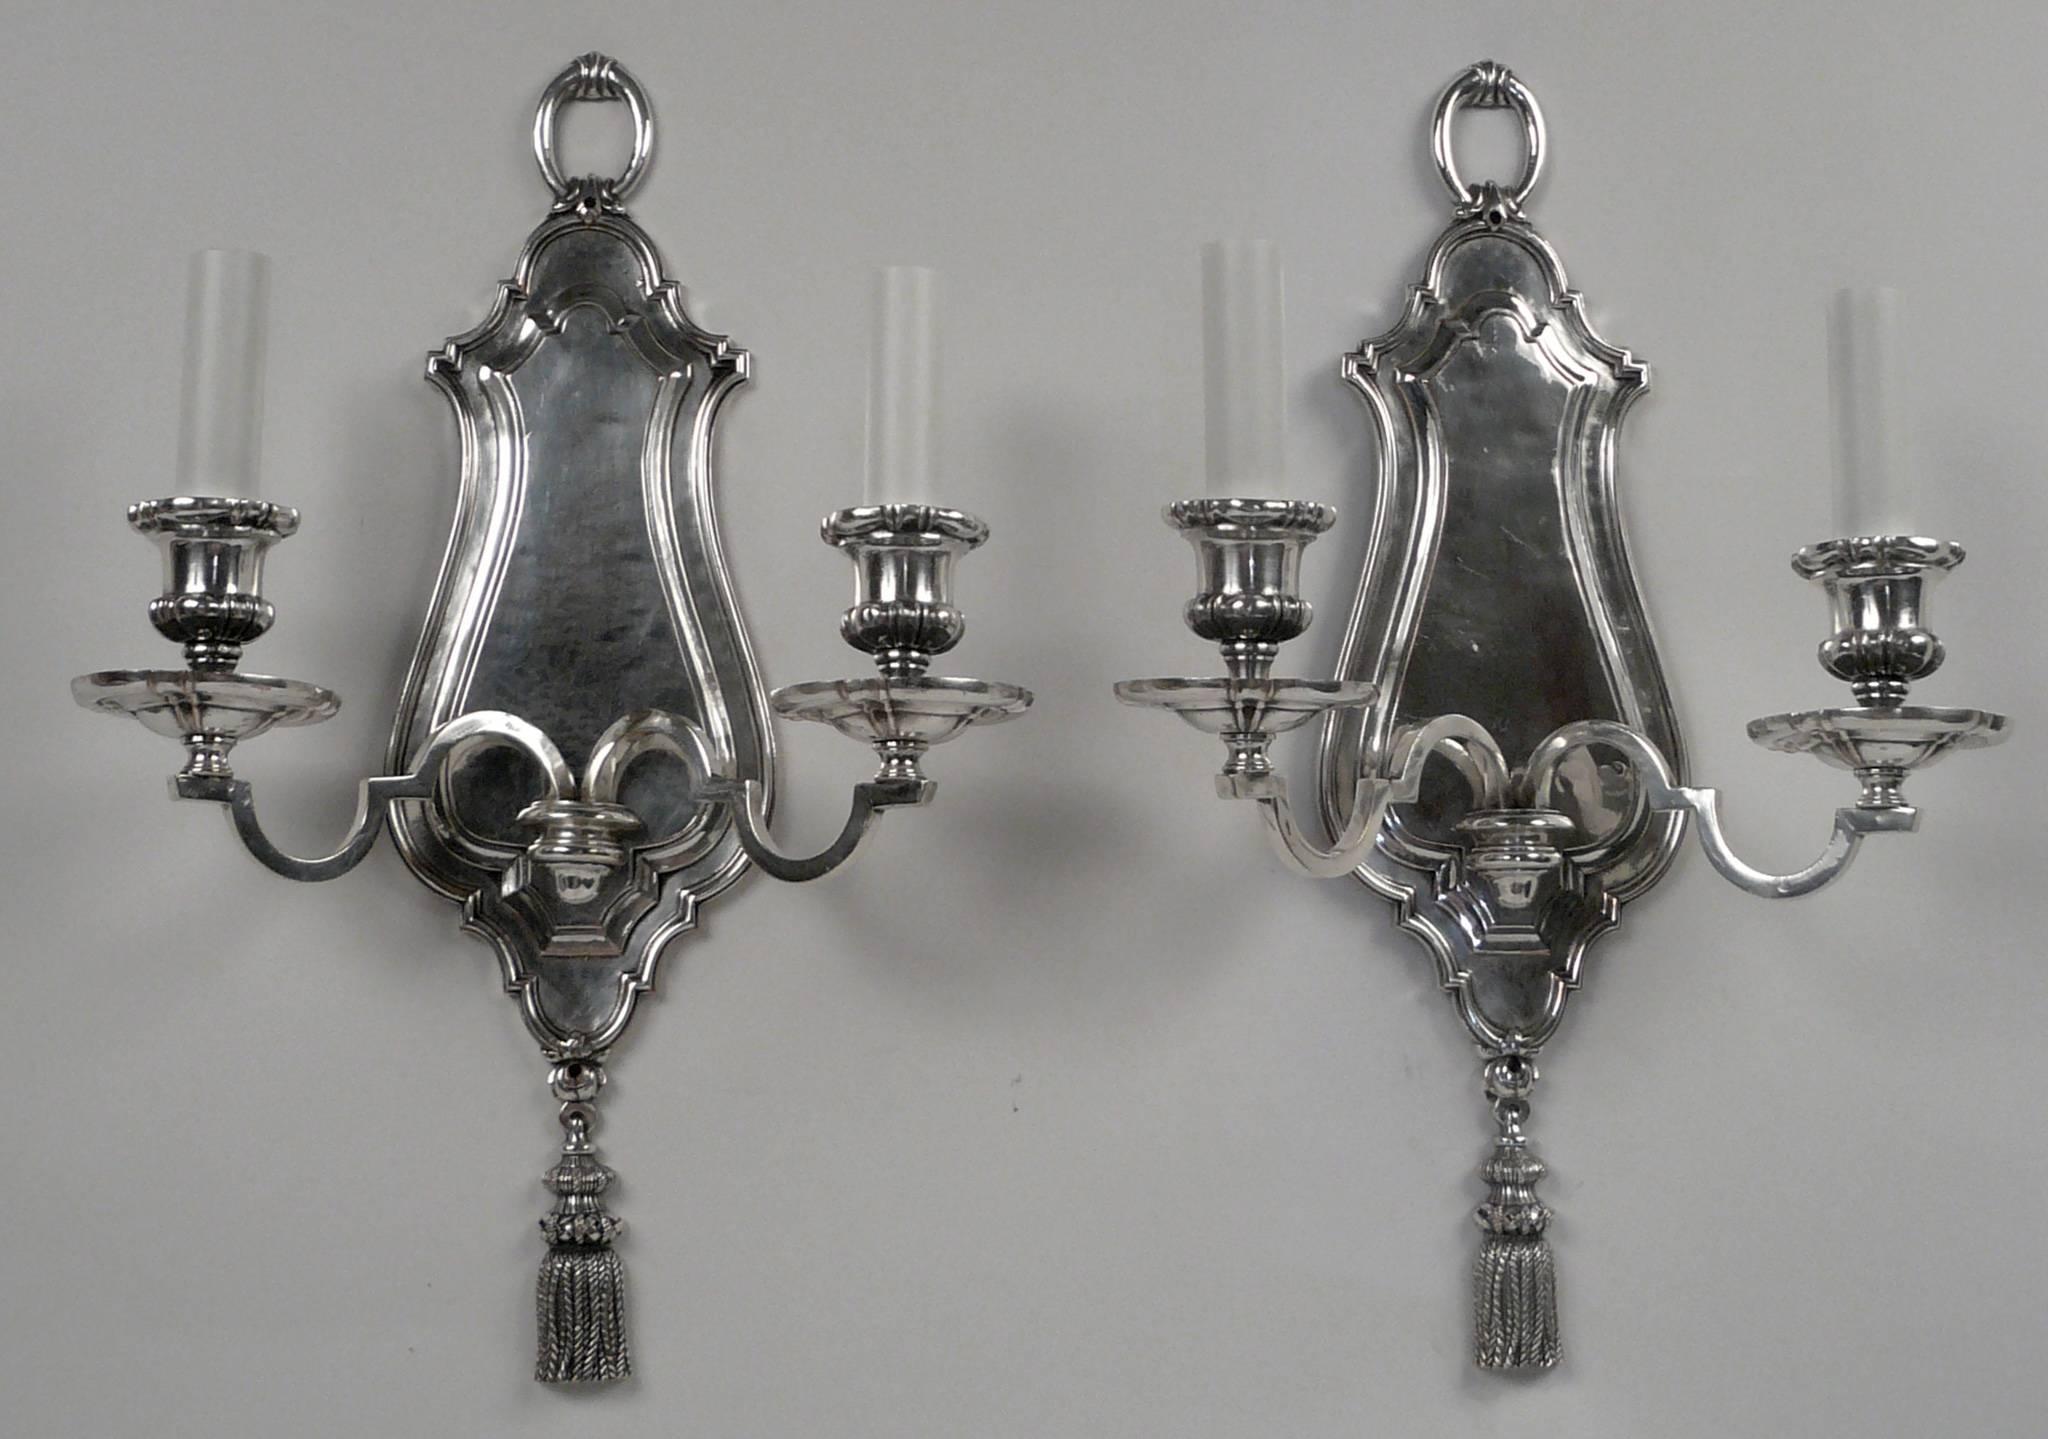 This pair of silver plated sconces by Edward F. Caldwell are finely detailed, and feature tassels, and loop-form finials.